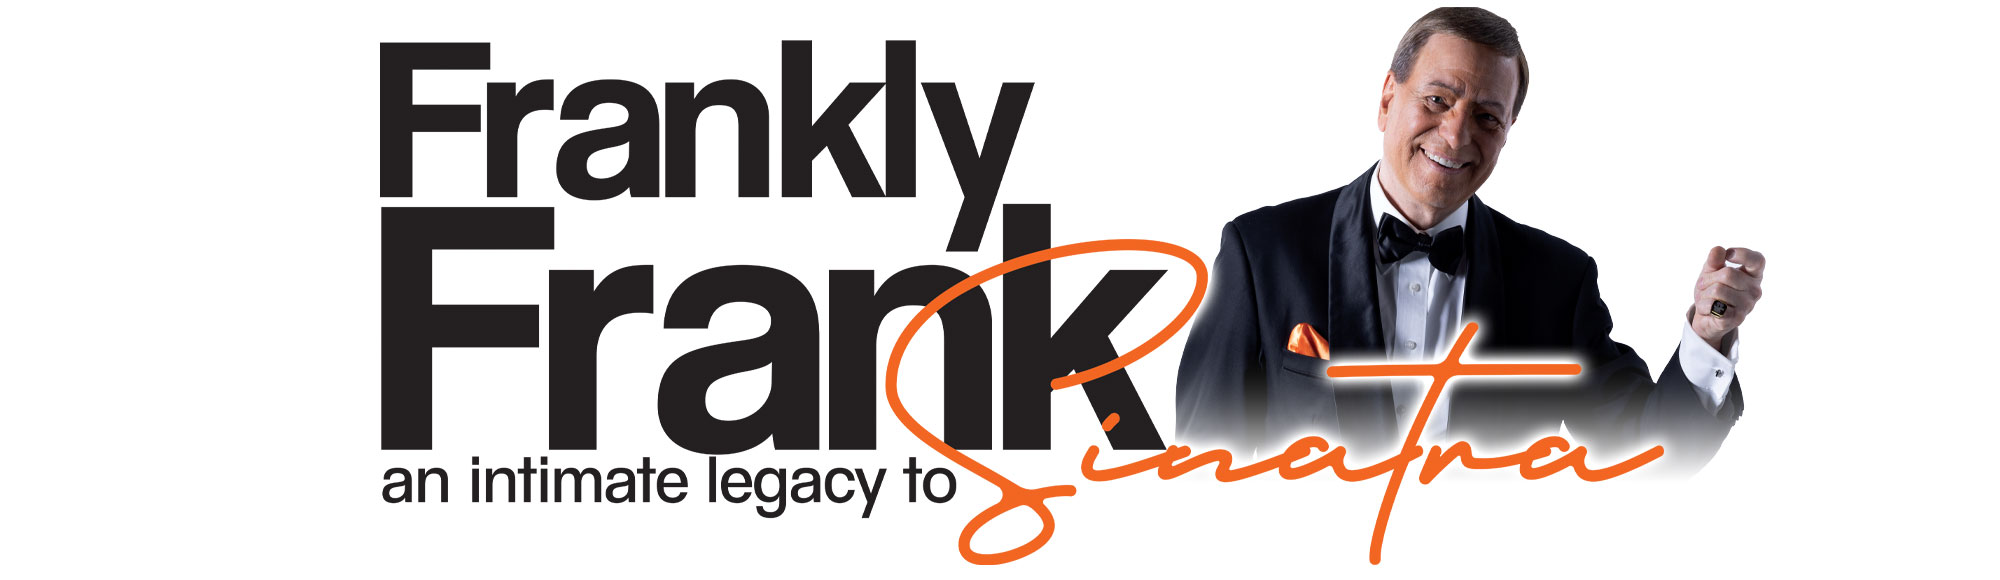 Frankly Frank show